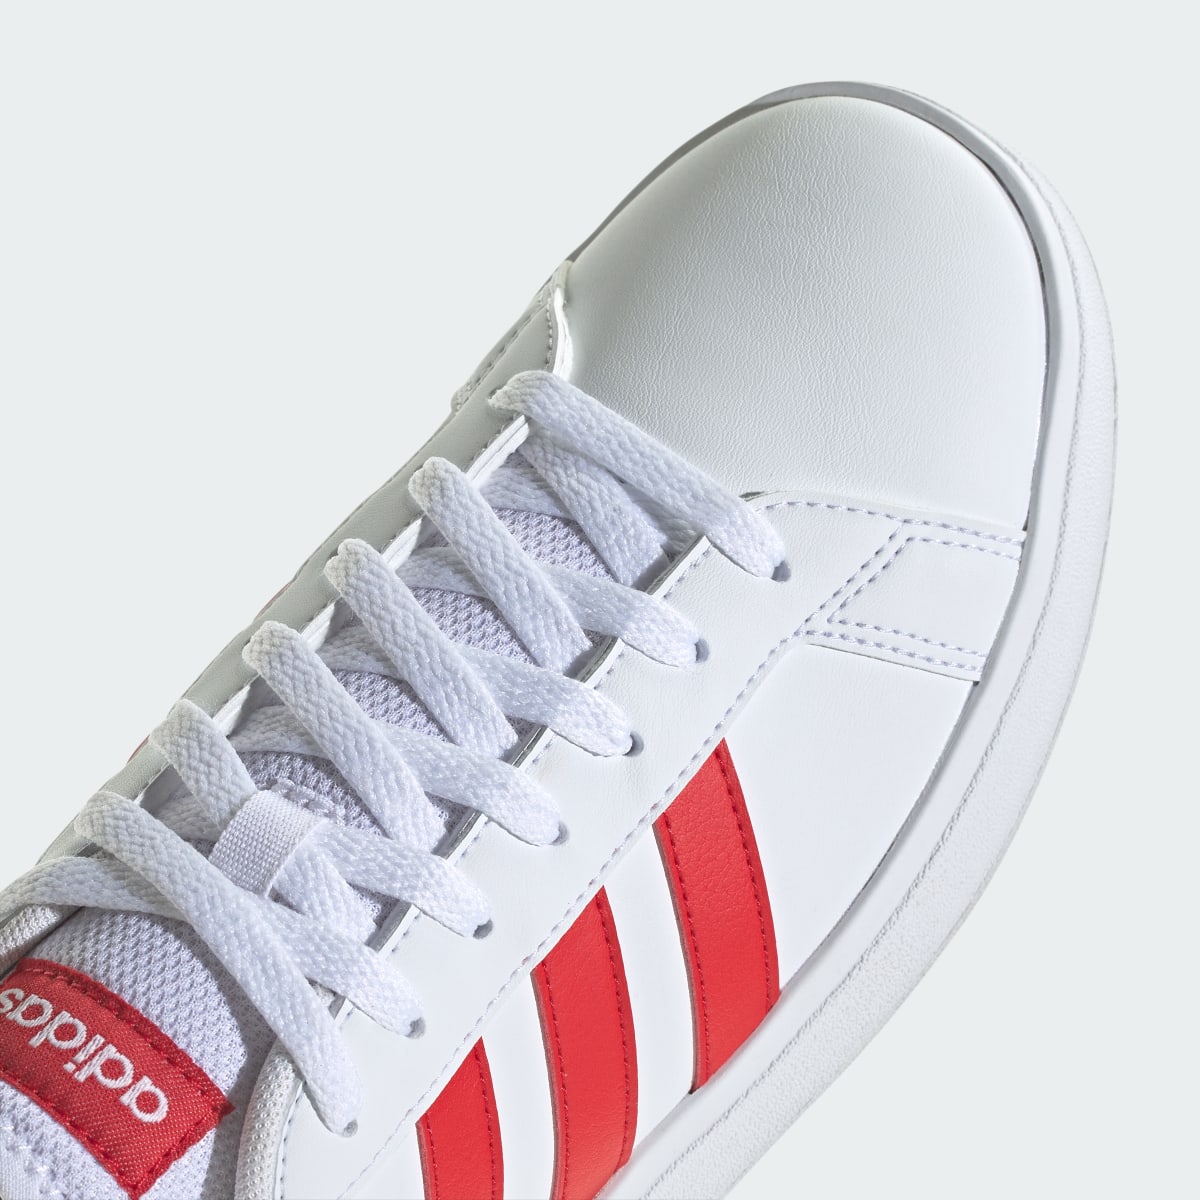 Adidas Grand Court TD Lifestyle Court Casual Shoes. 10